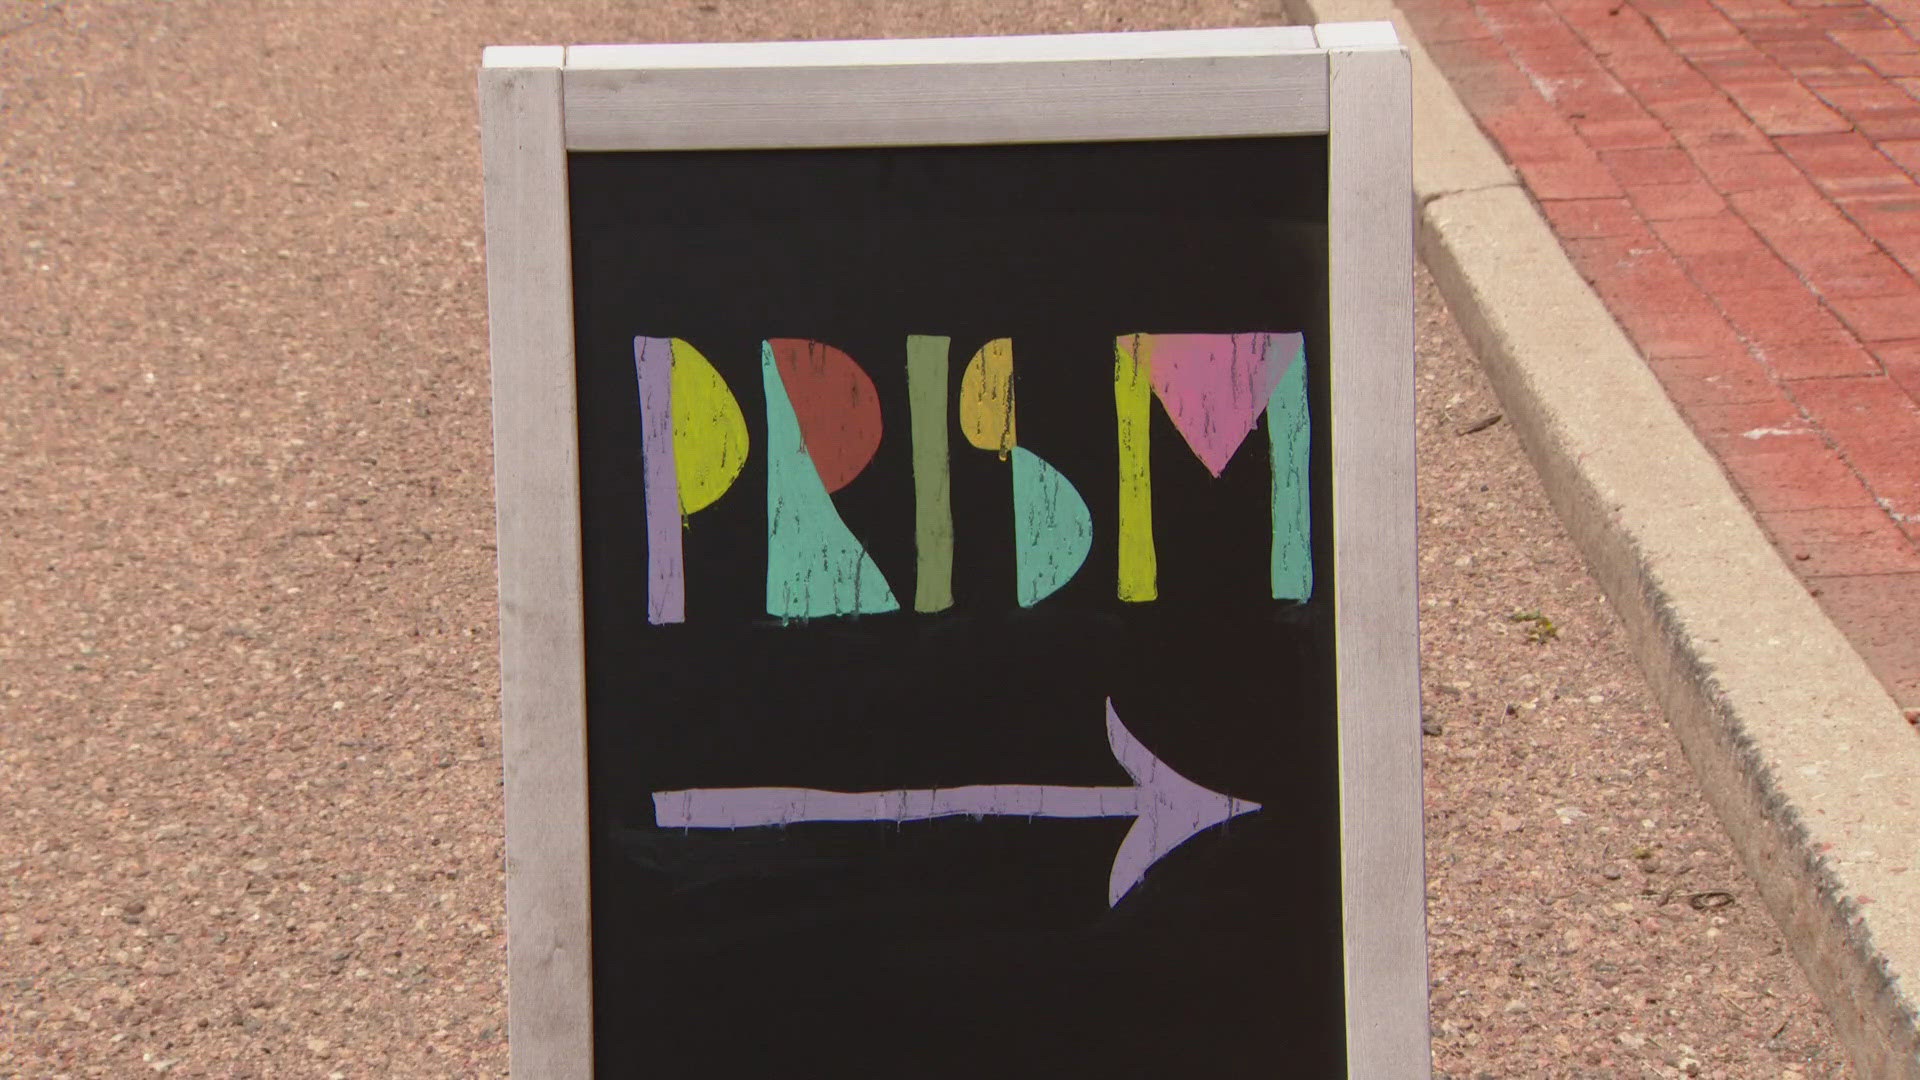 The Prism Community Collective is one of the first of its kind in Colorado Springs to connect the LGBTQ+ community to mental and physical health resources.